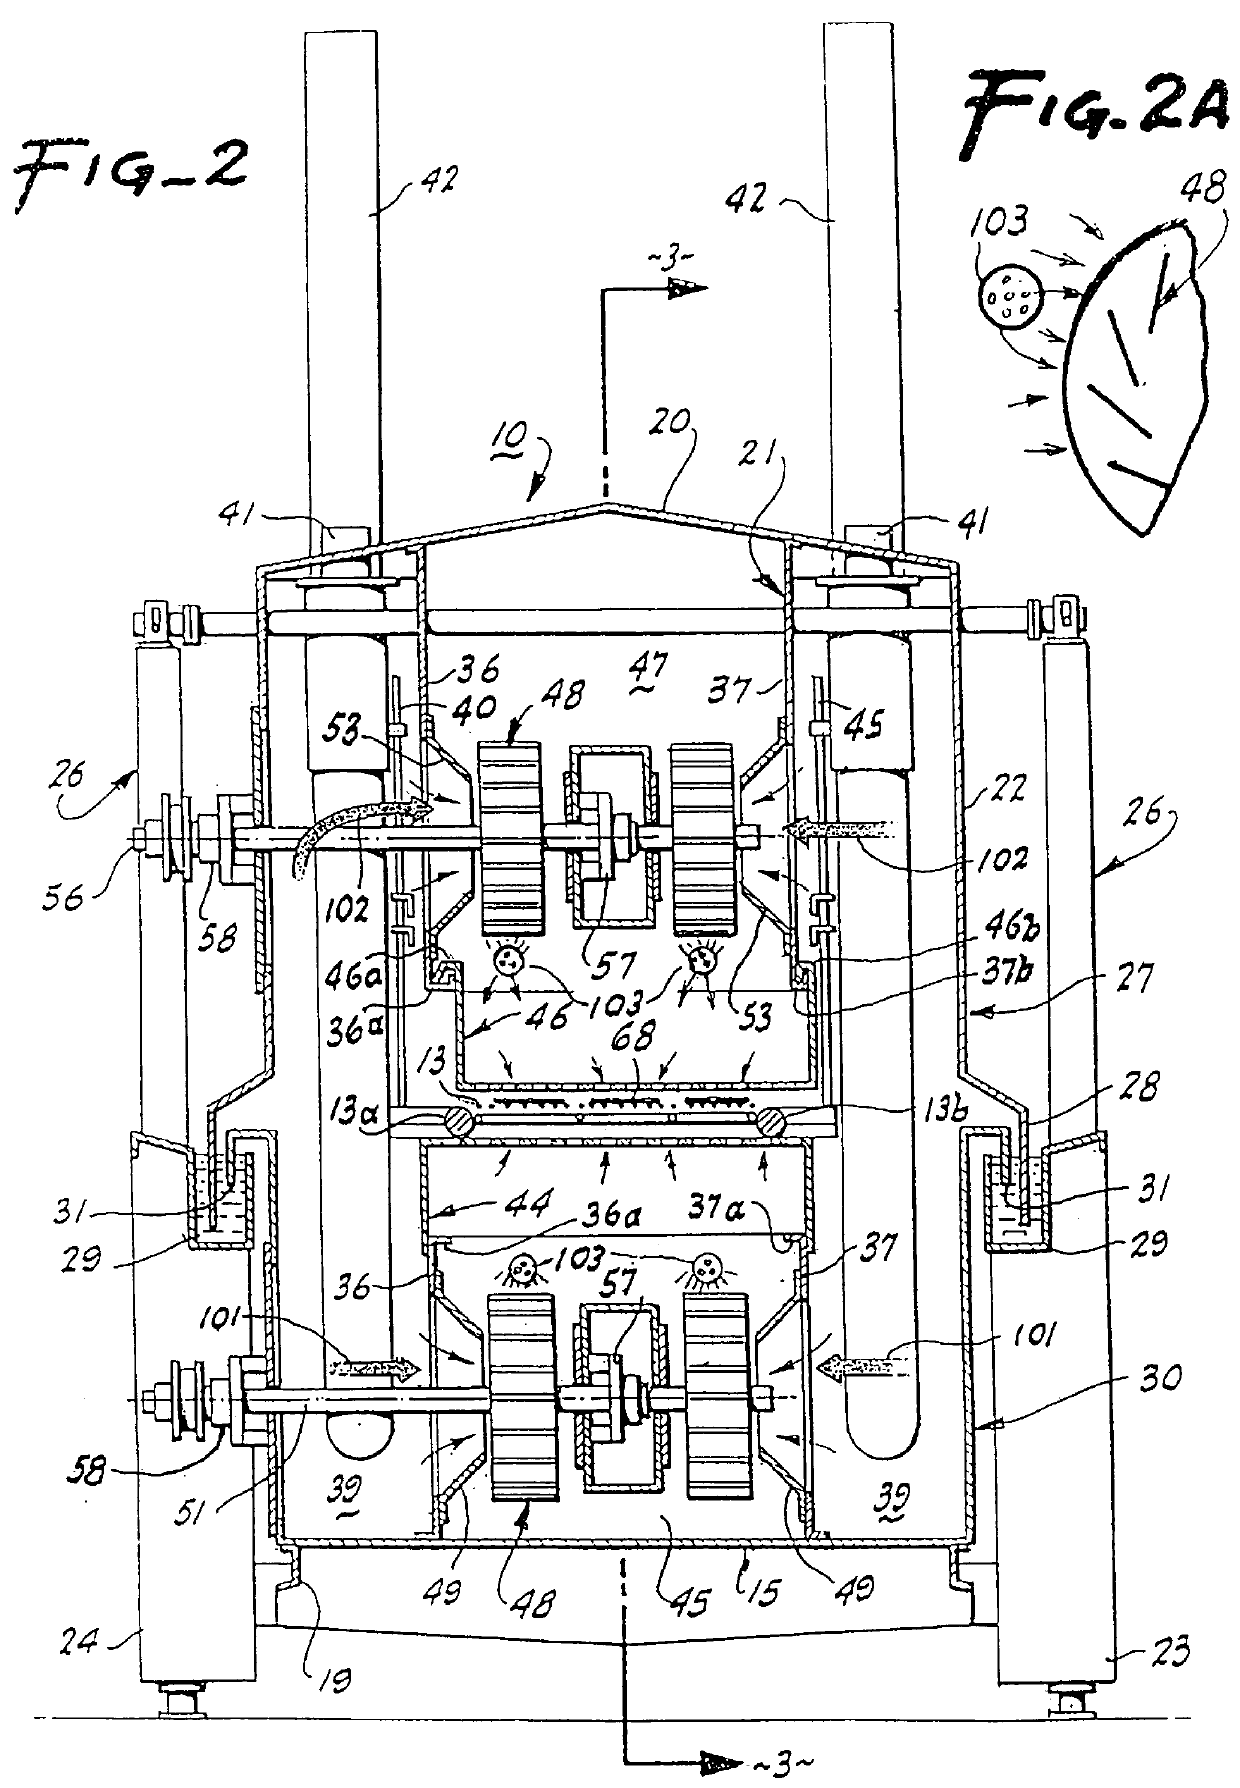 Method of cooking food products in an air impingement oven